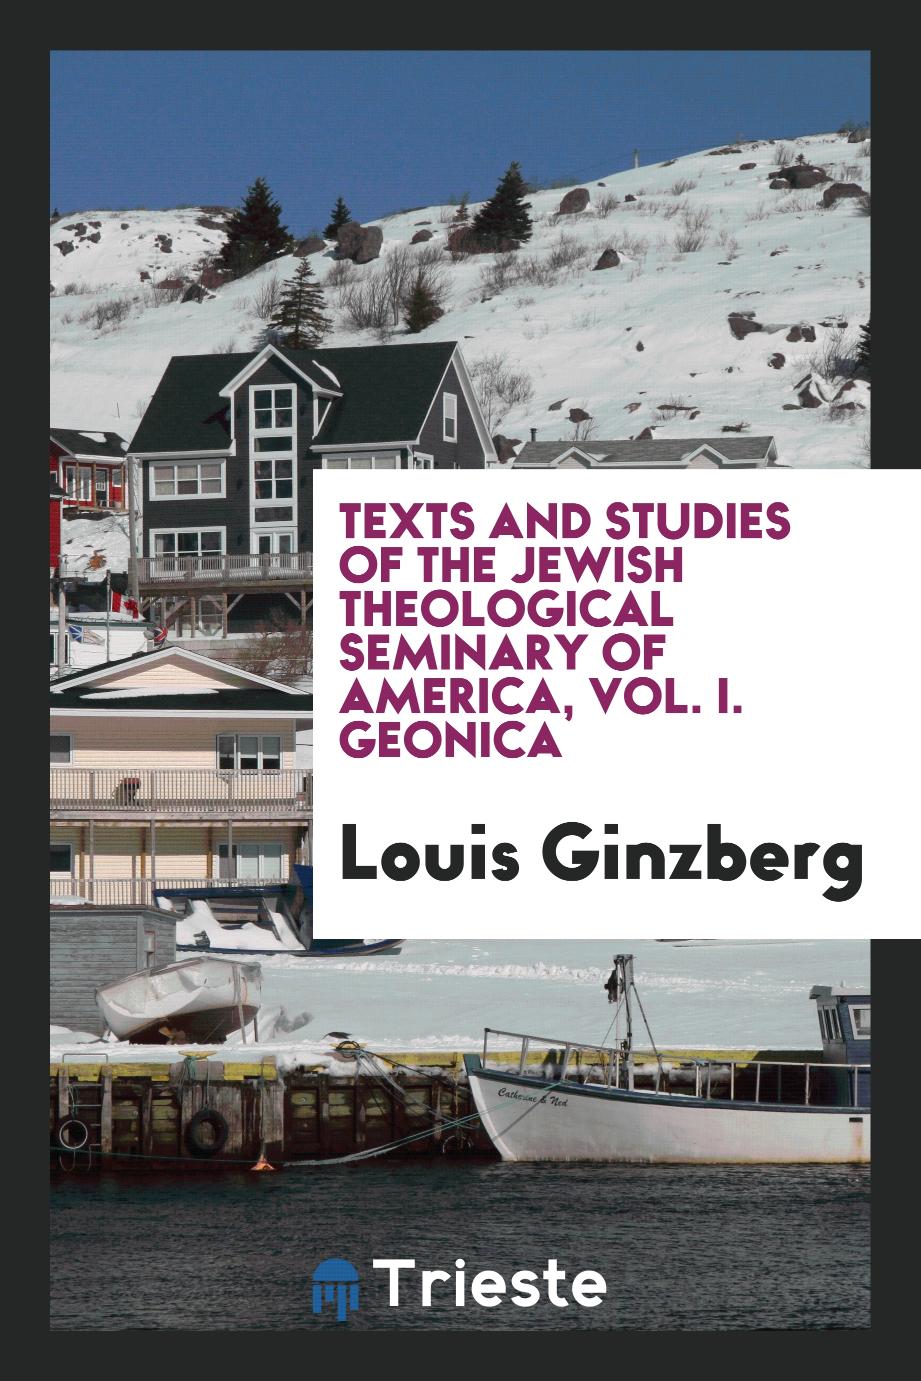 Texts and studies of the Jewish Theological Seminary of America, Vol. I. Geonica